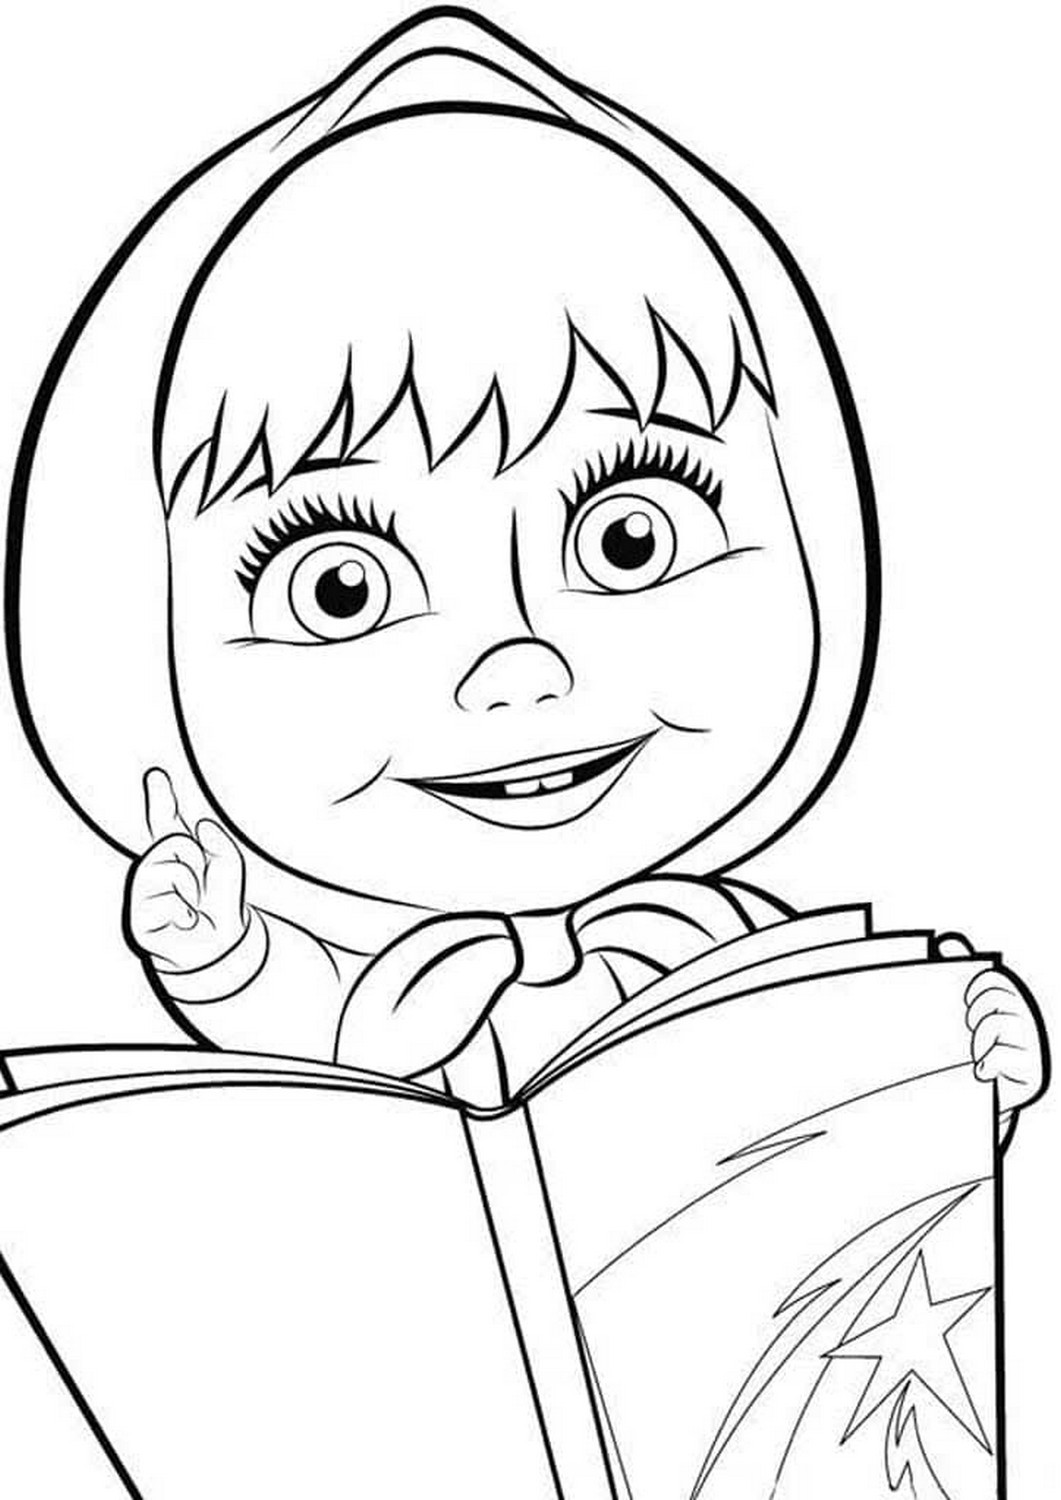 Masha and the Bear 96  coloring pages to print and coloring